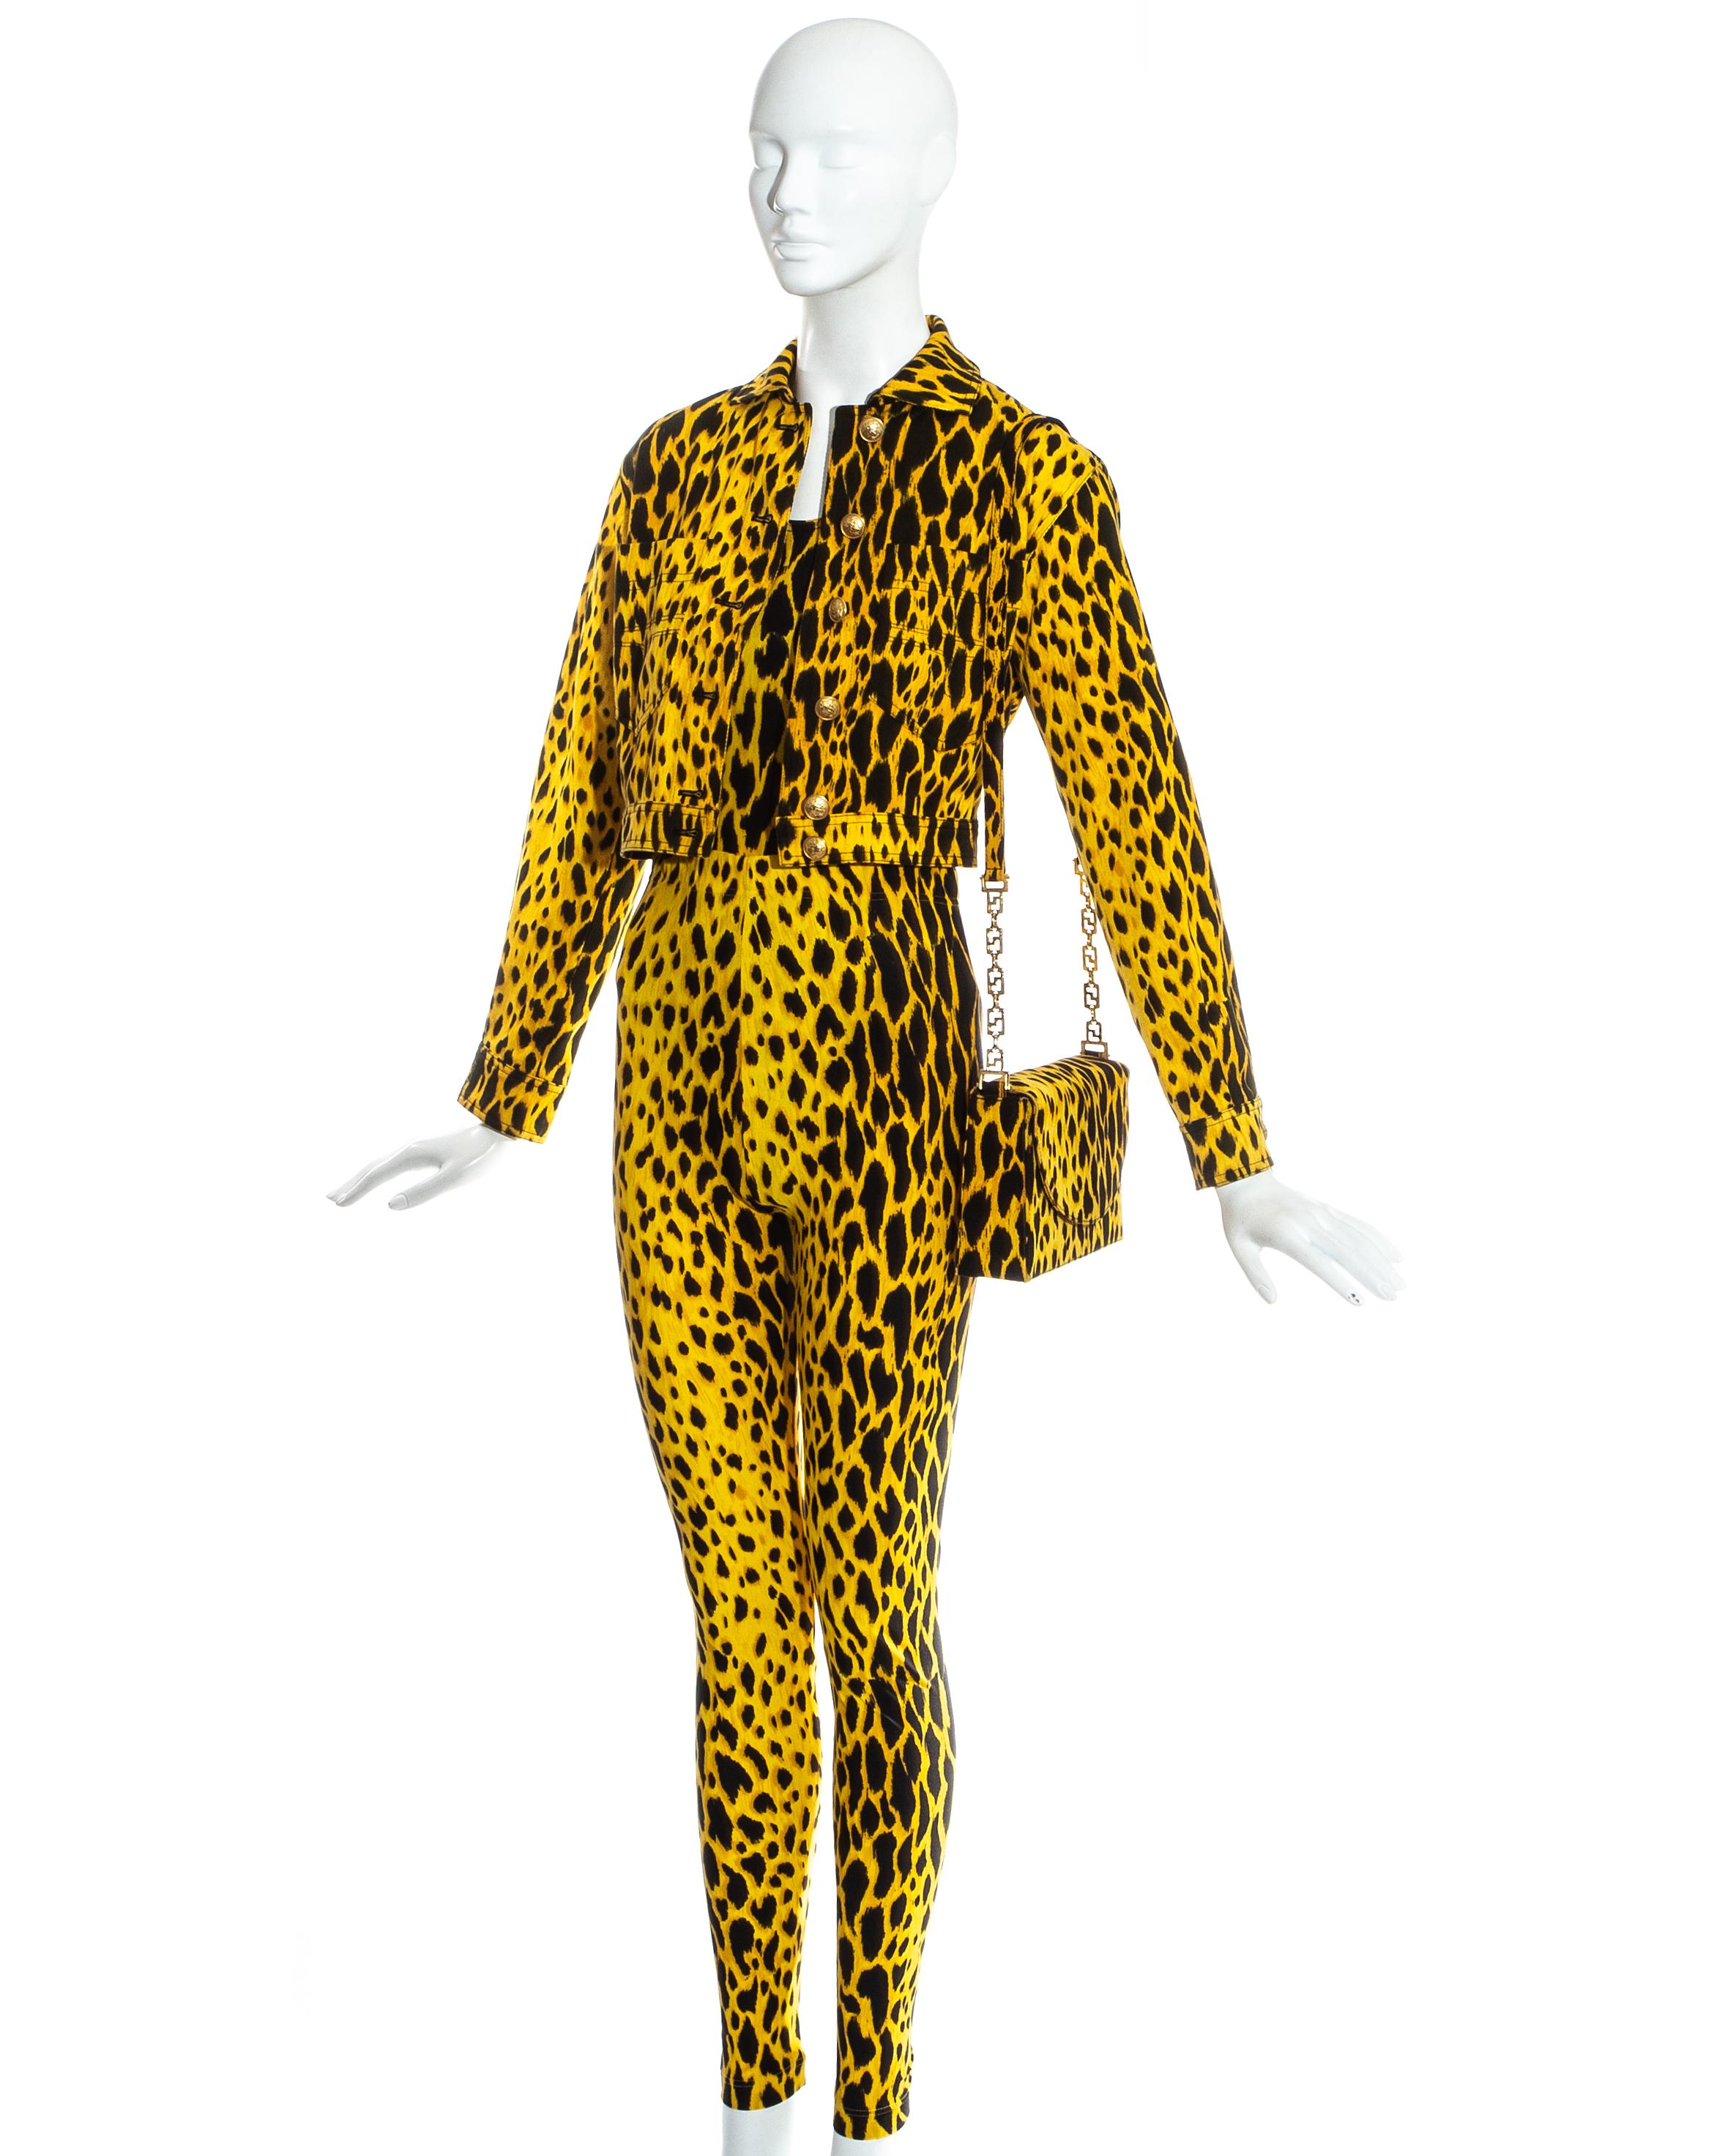 Gianni Versace yellow and black leopard print ensemble, includes lycra bodysuit and leggings, denim jacket and matching flap bag with gold chain. 

Spring-Summer 1992